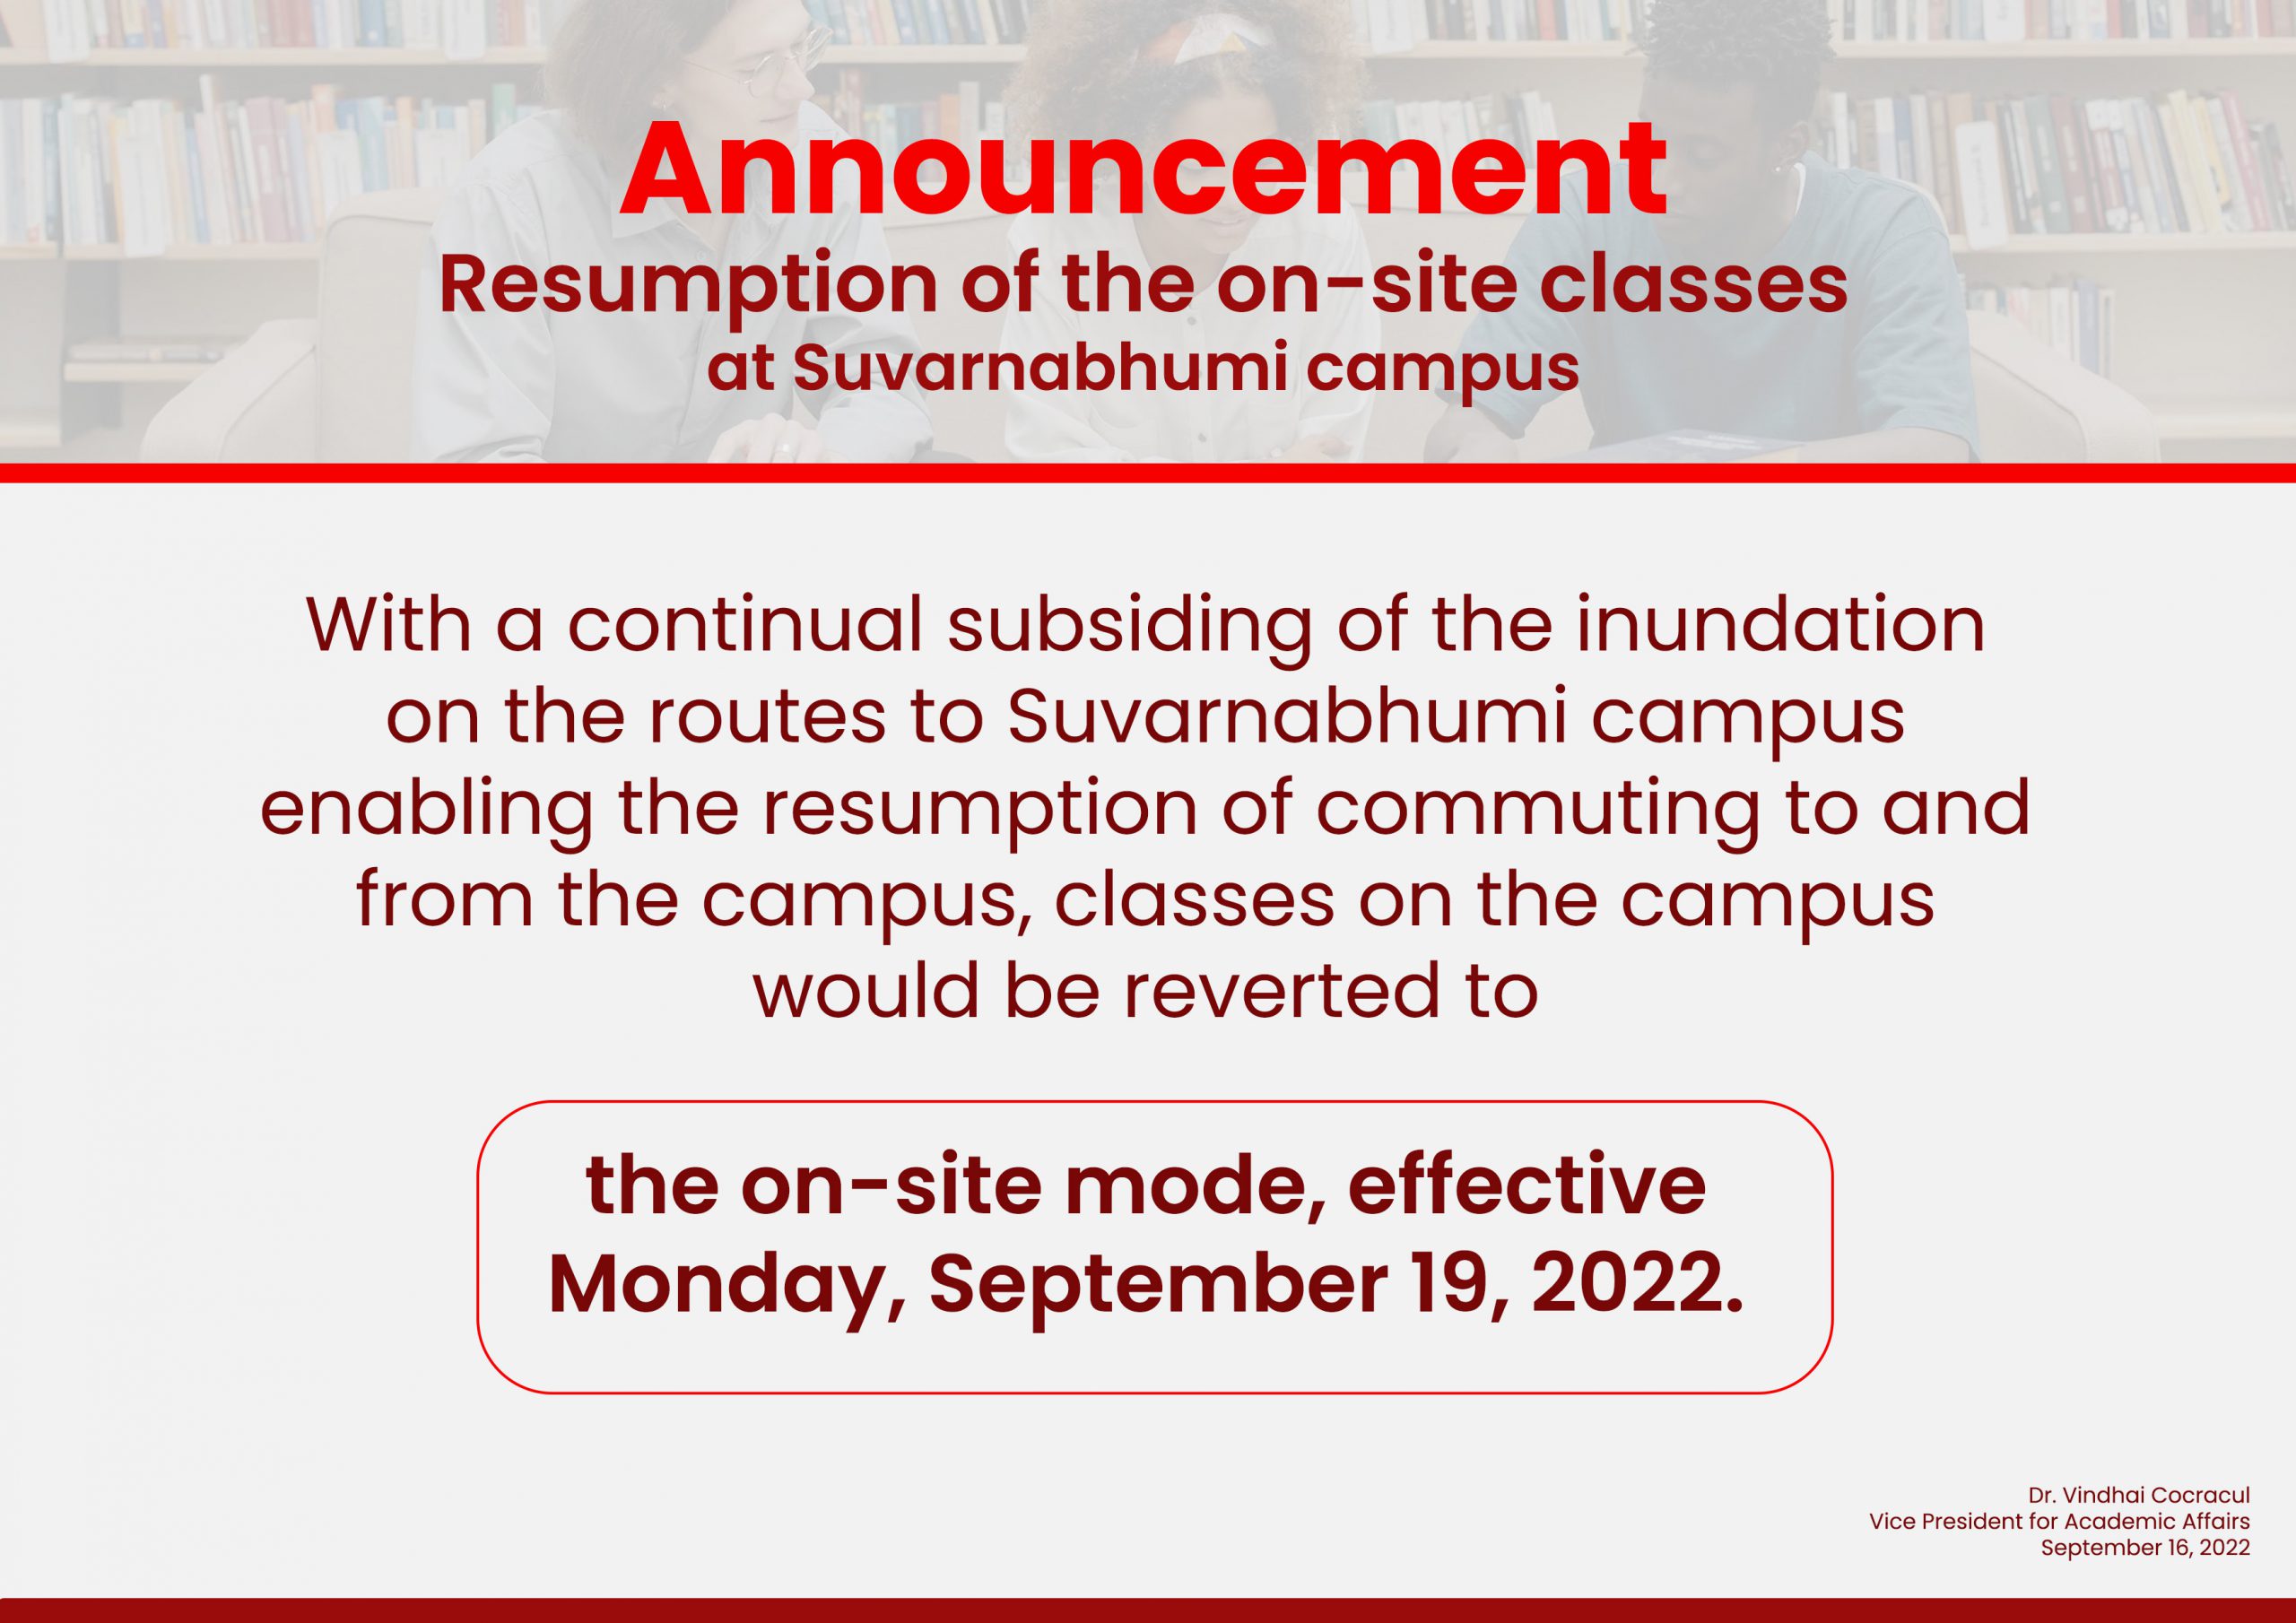 Resumption of the on-site classes